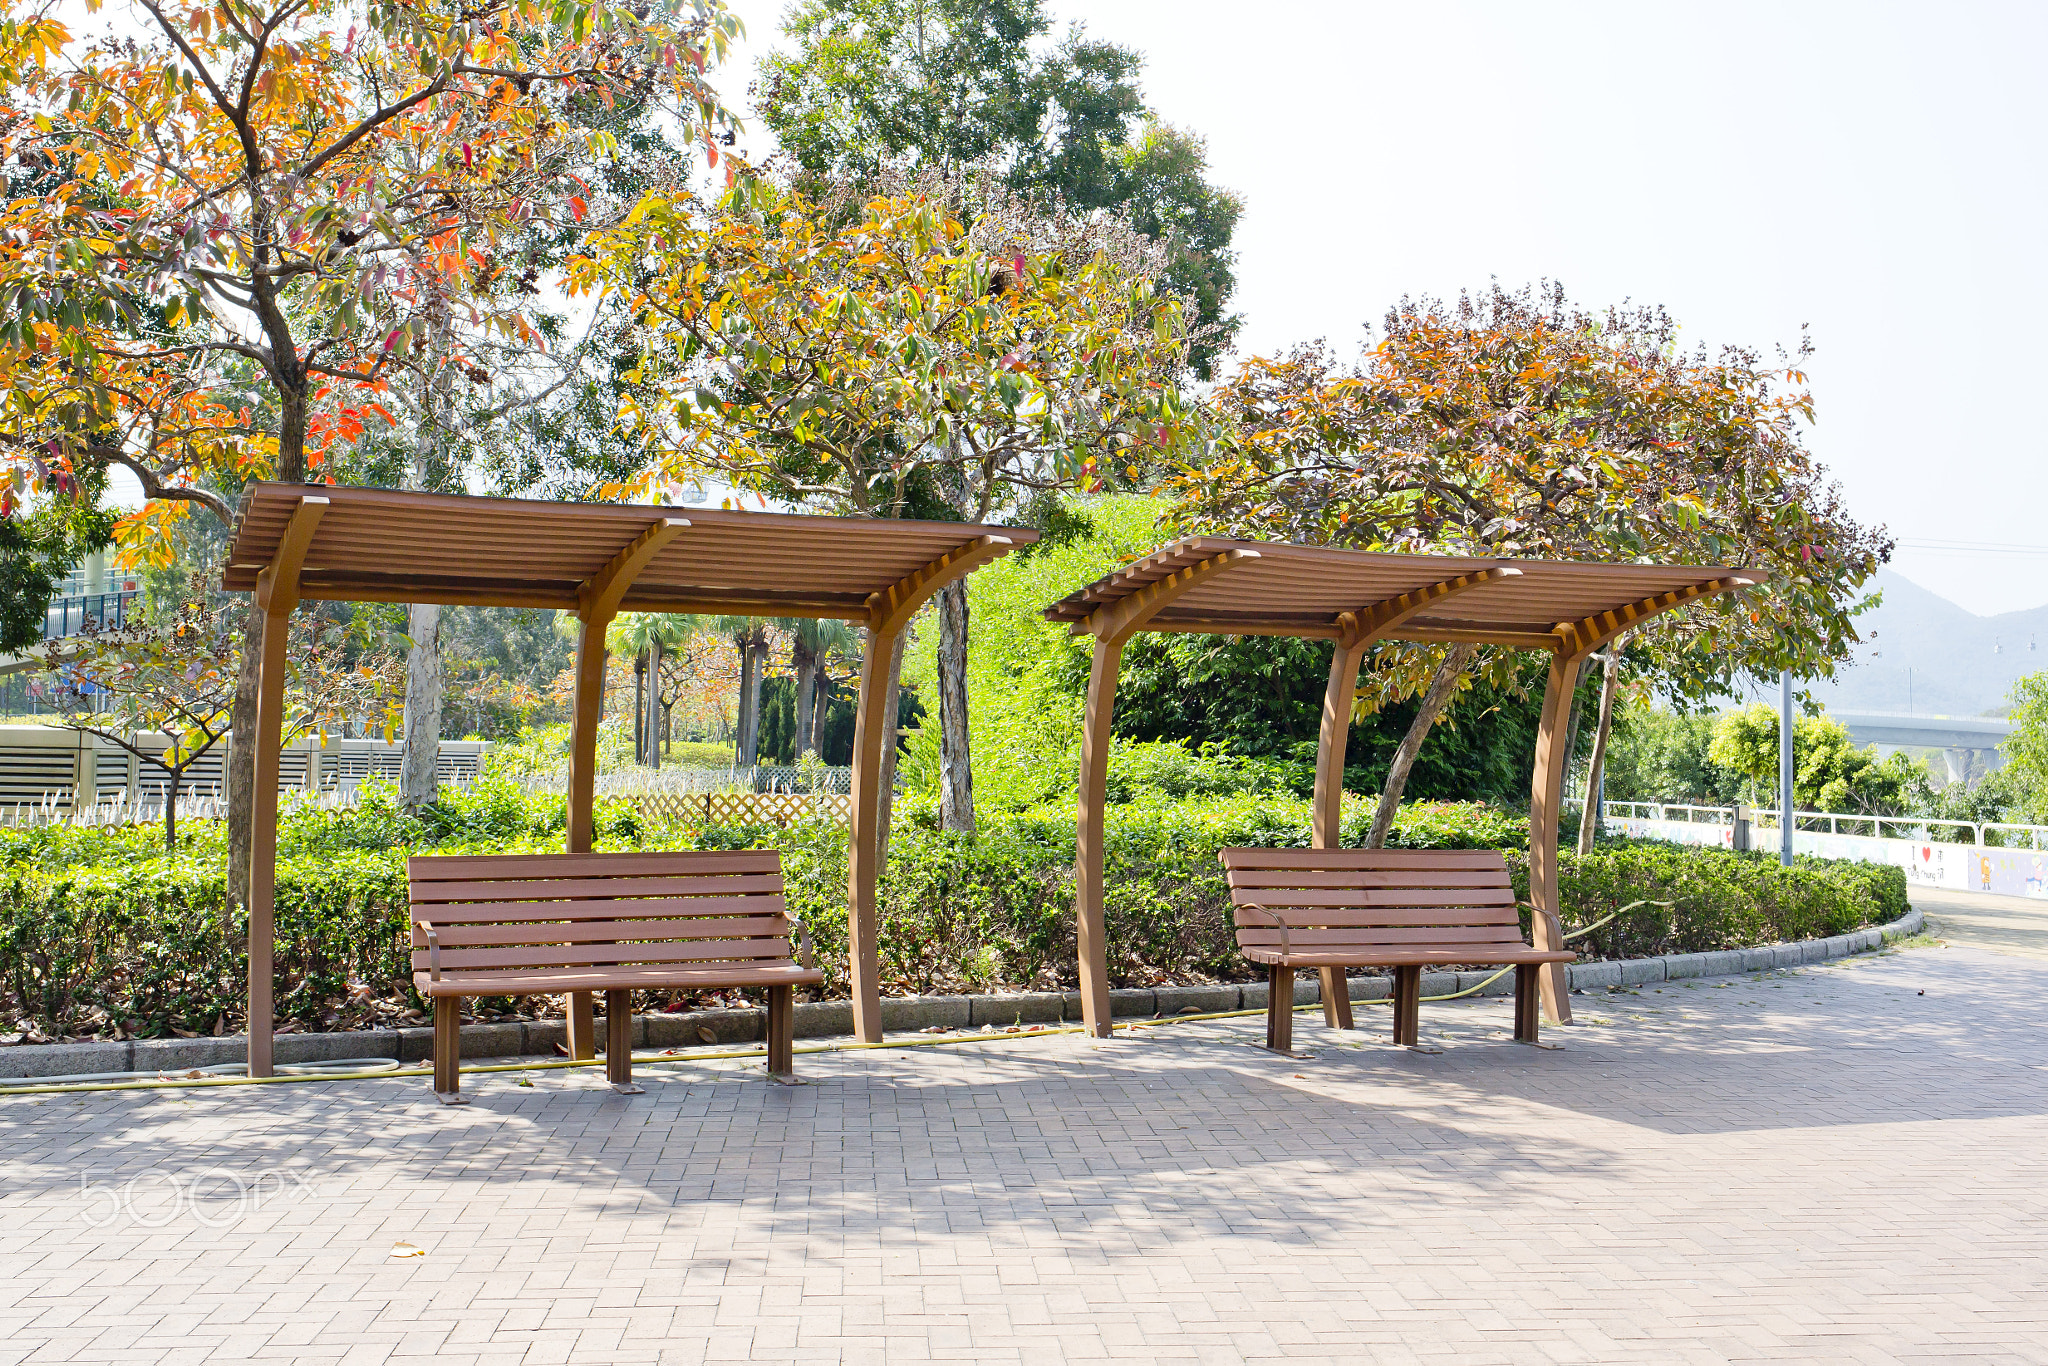 Rustic pergolas with benches under blossoming trees